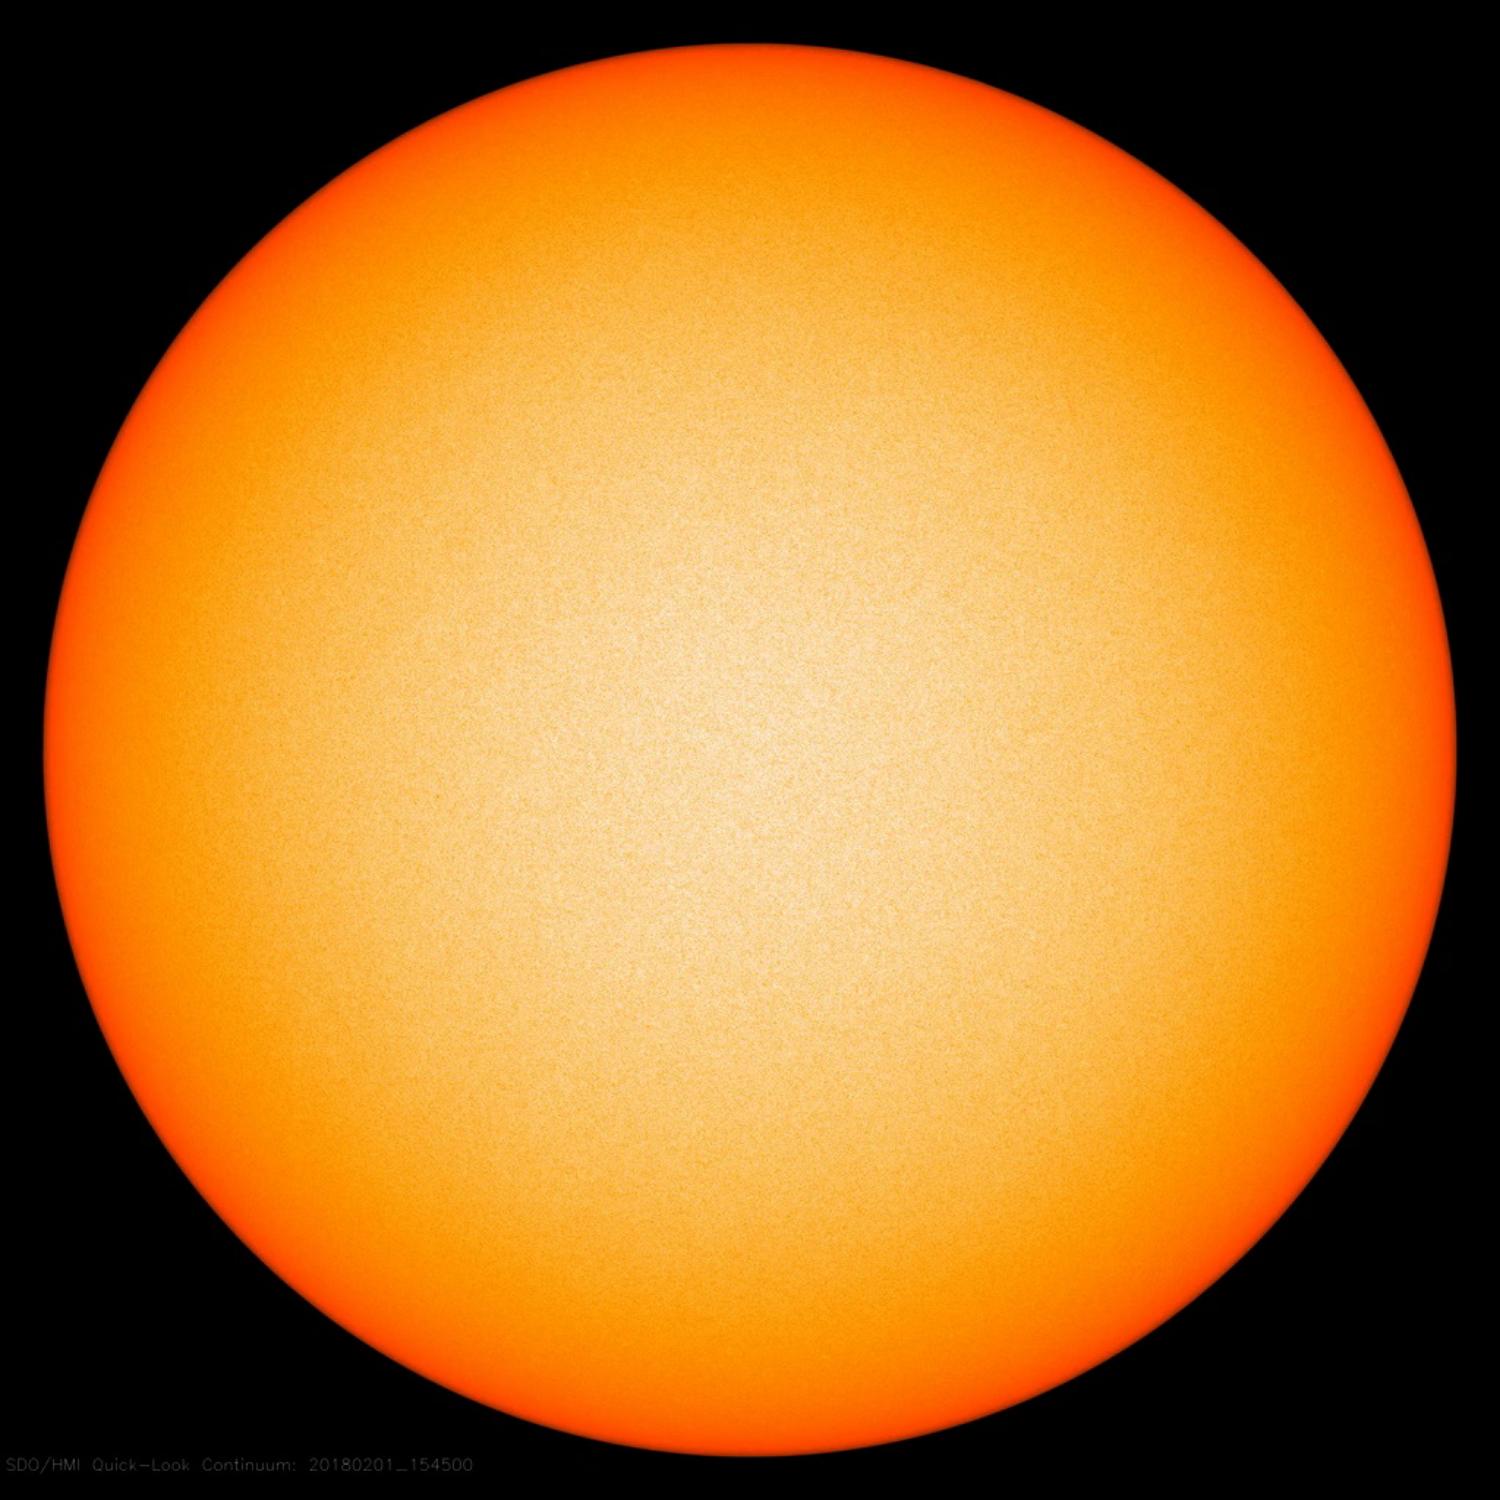 An image of the Sun in 2018 when it had no sunspots.